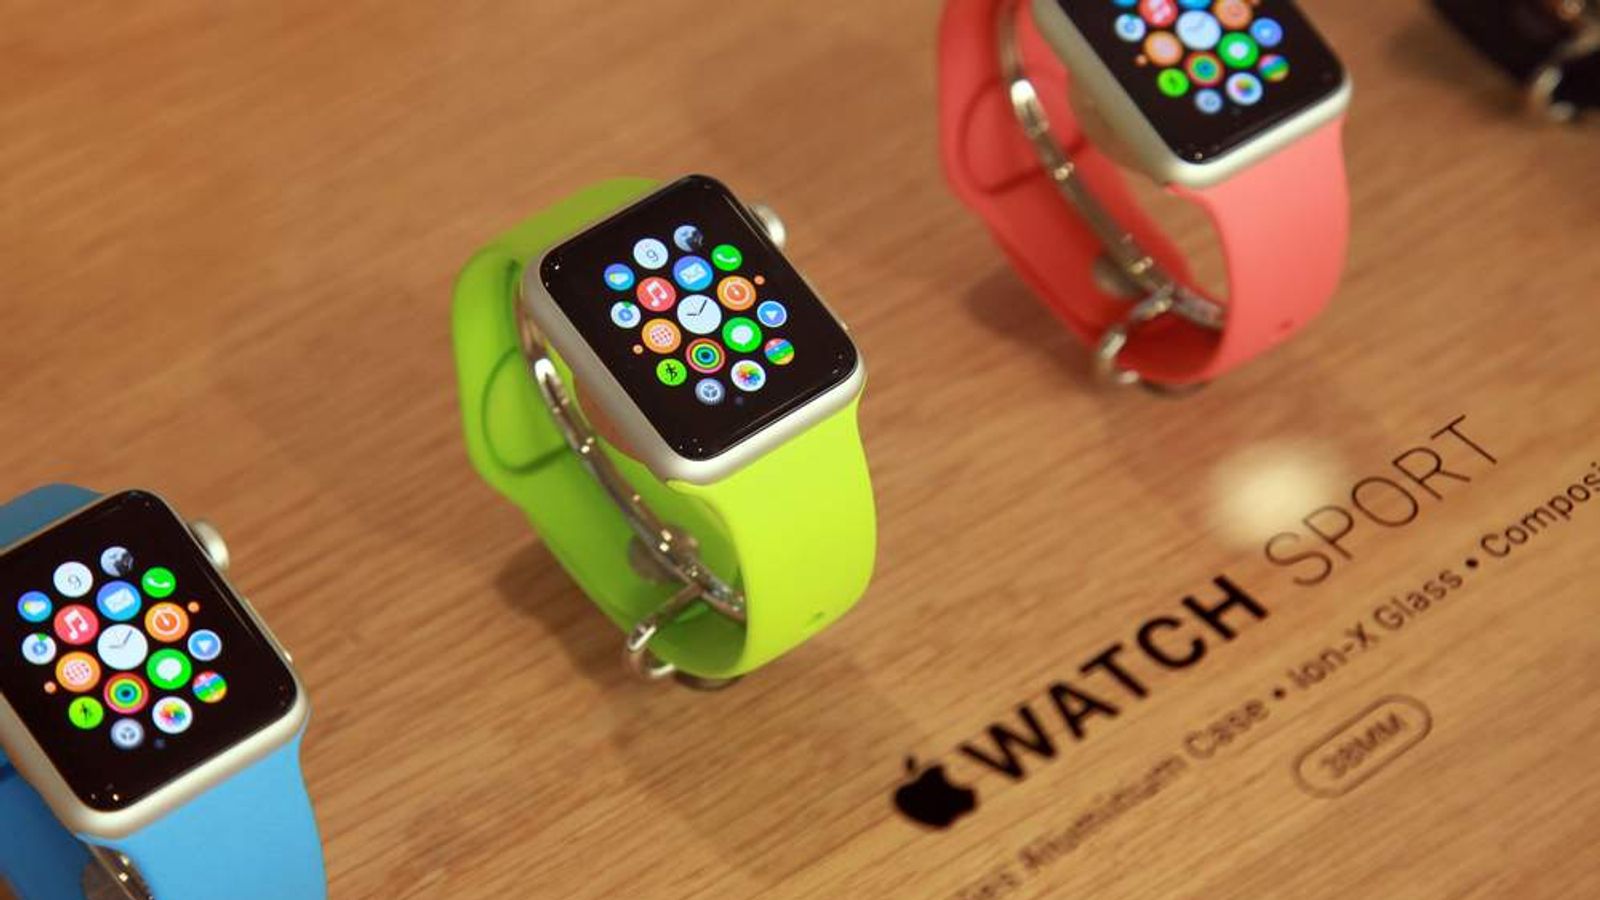 Apple Watch Price And Key Dates To Be Revealed Science & Tech News